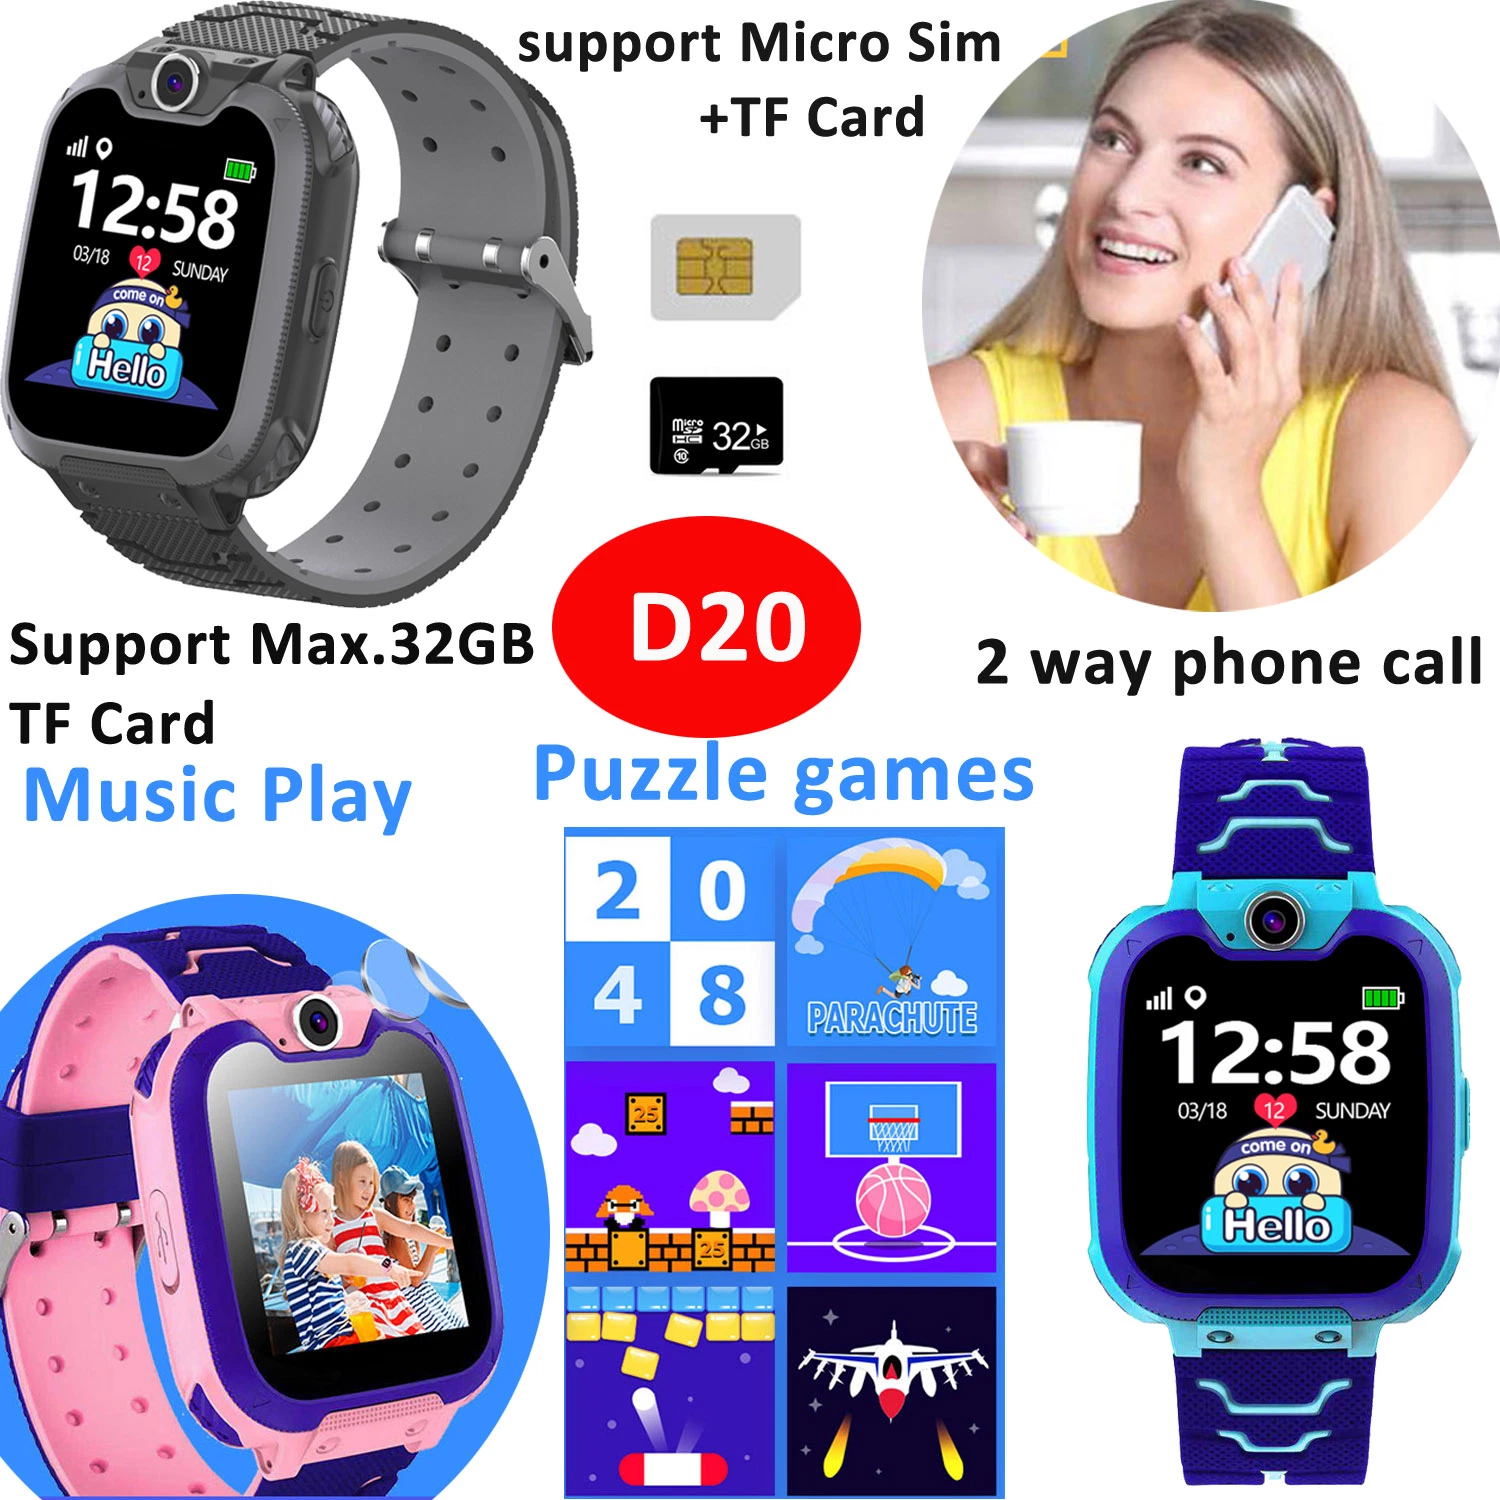 New Developed 2G IP67 Waterproof Child Toy Smartwatch with 7 Games Support SD Card D20